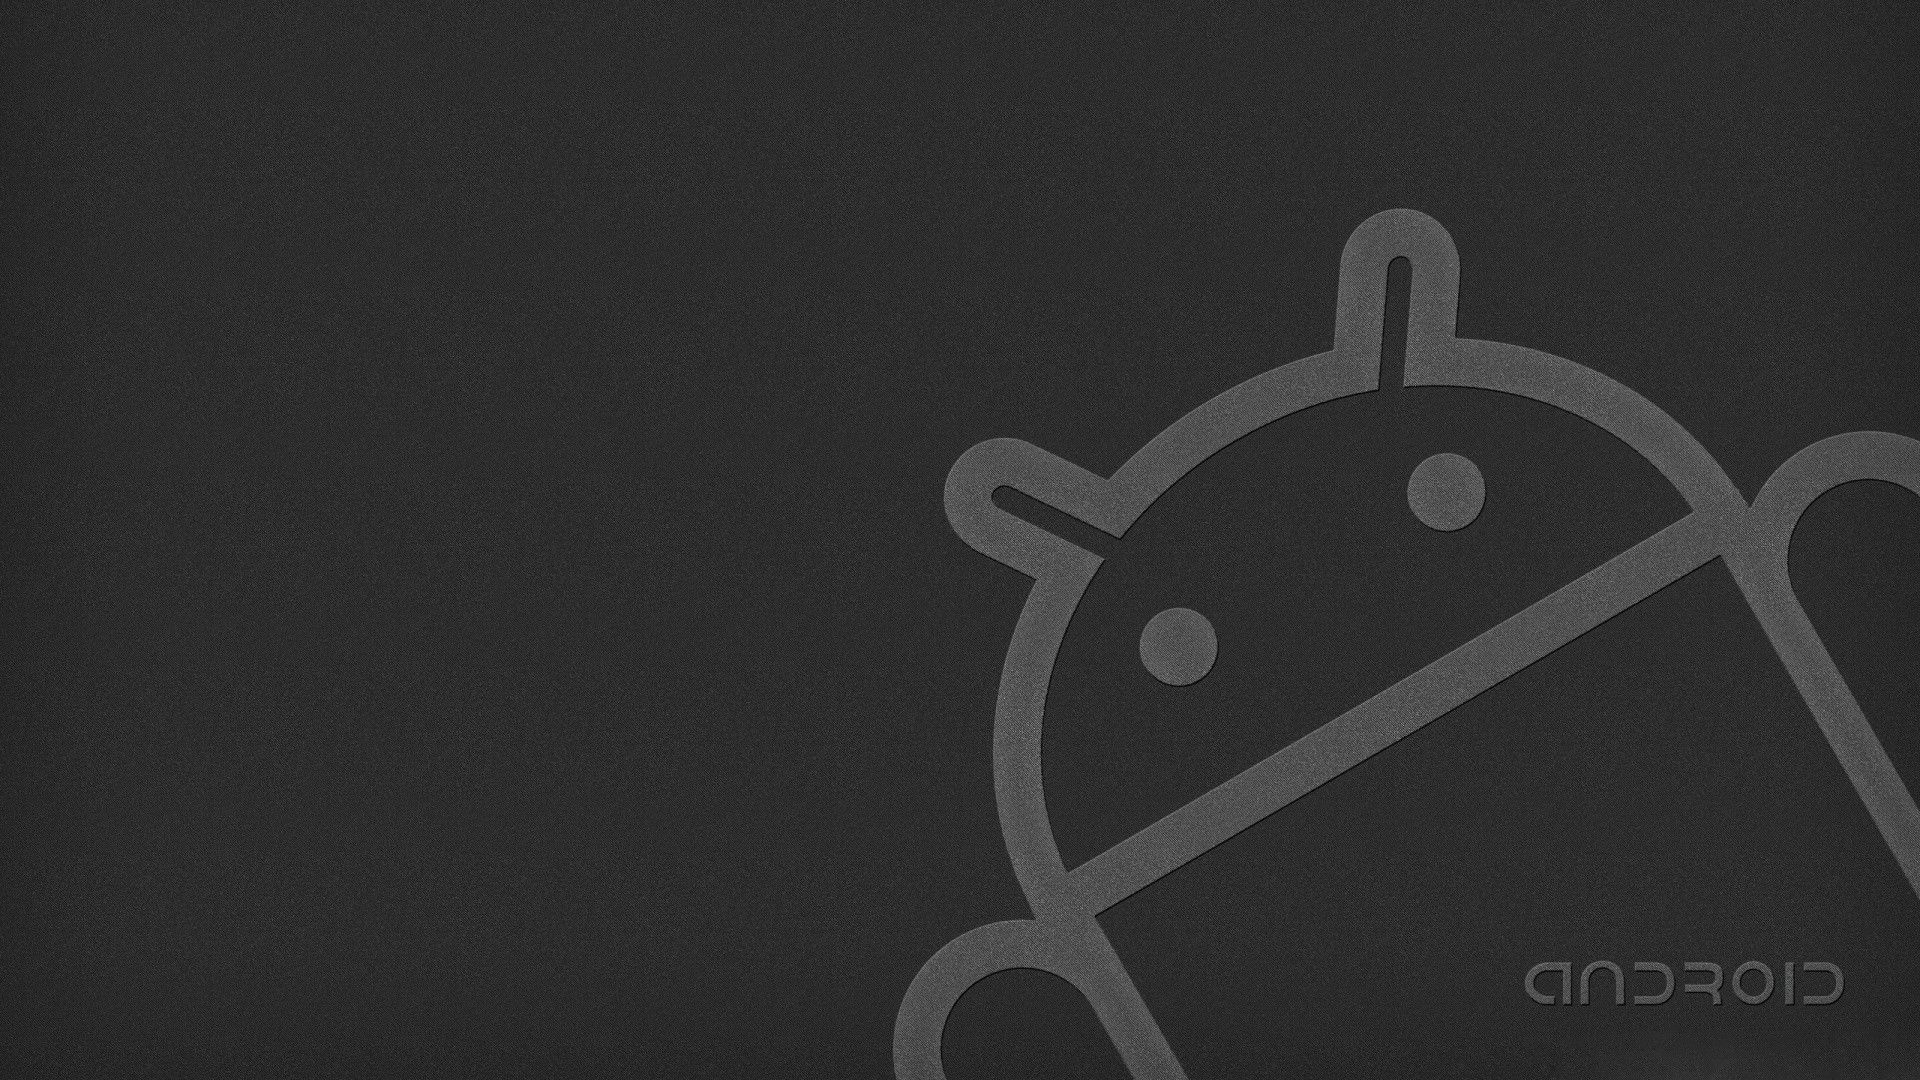 1920x1080 Android Logo Design Picture Wallpaper